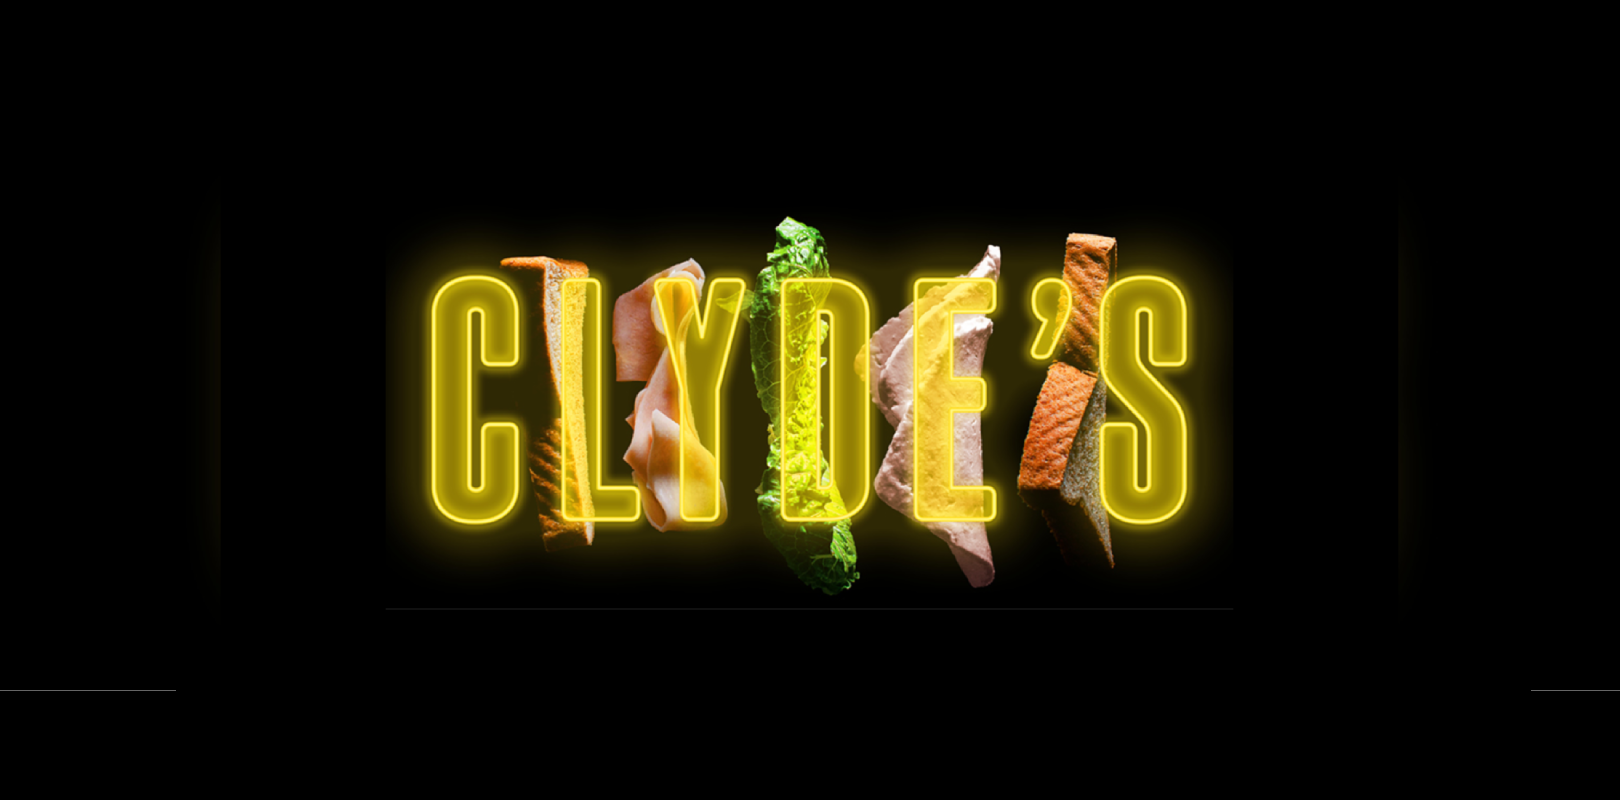 CLYDE'S promo image